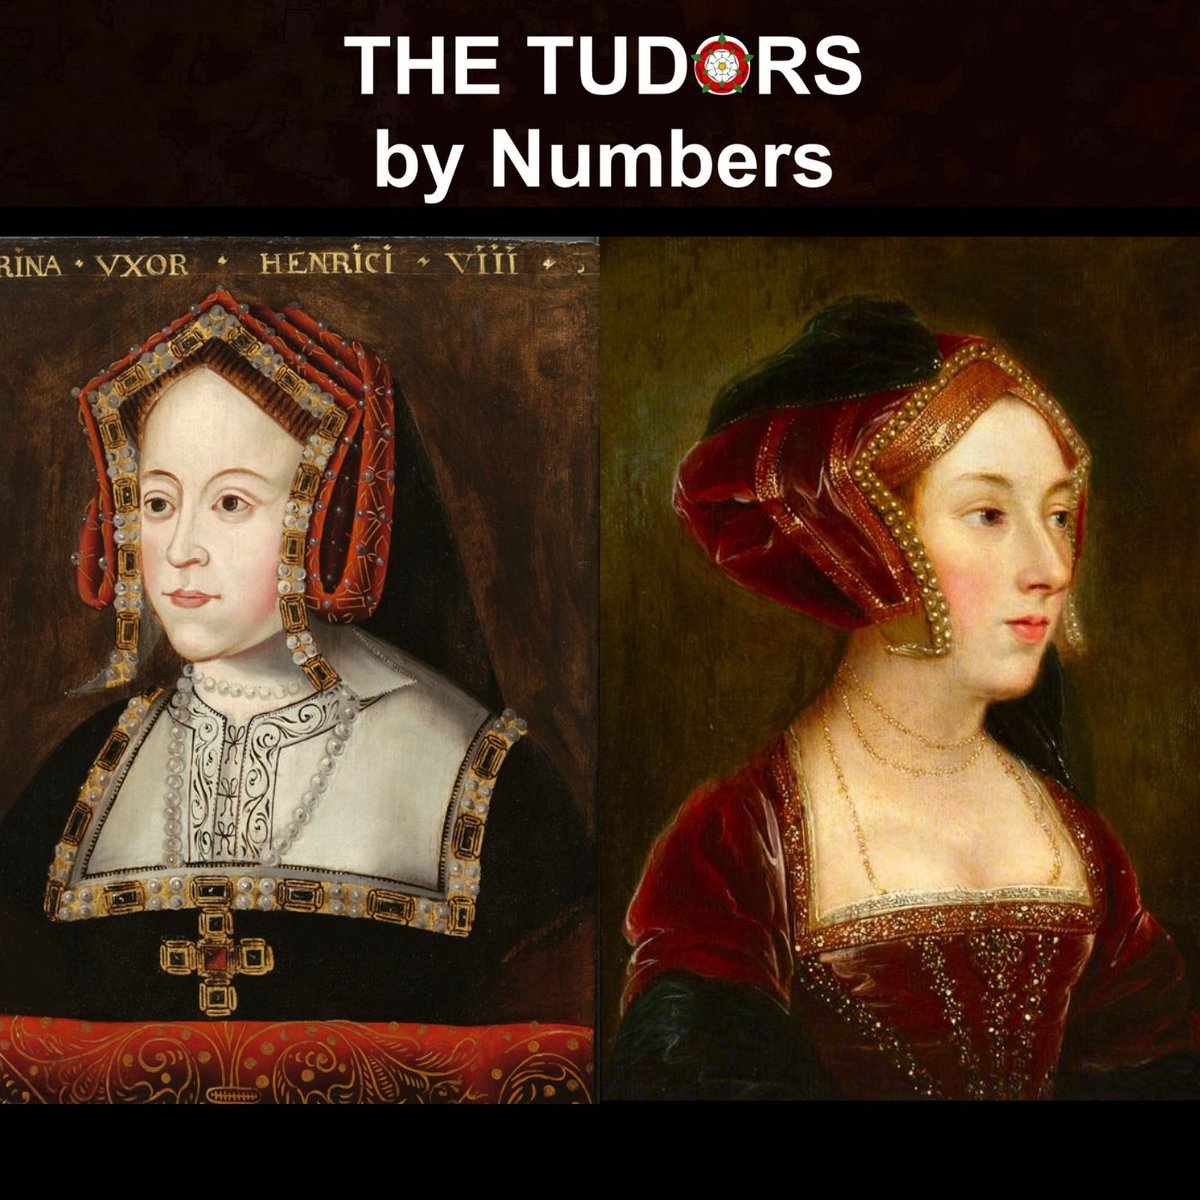 April 1527: #katherineofaragon & #anneboleyn are taking center stage in a drama that would last well into the next decade. These 2 women changed history. Read more in #TheTudorsbyNumbers! @penswordbooks